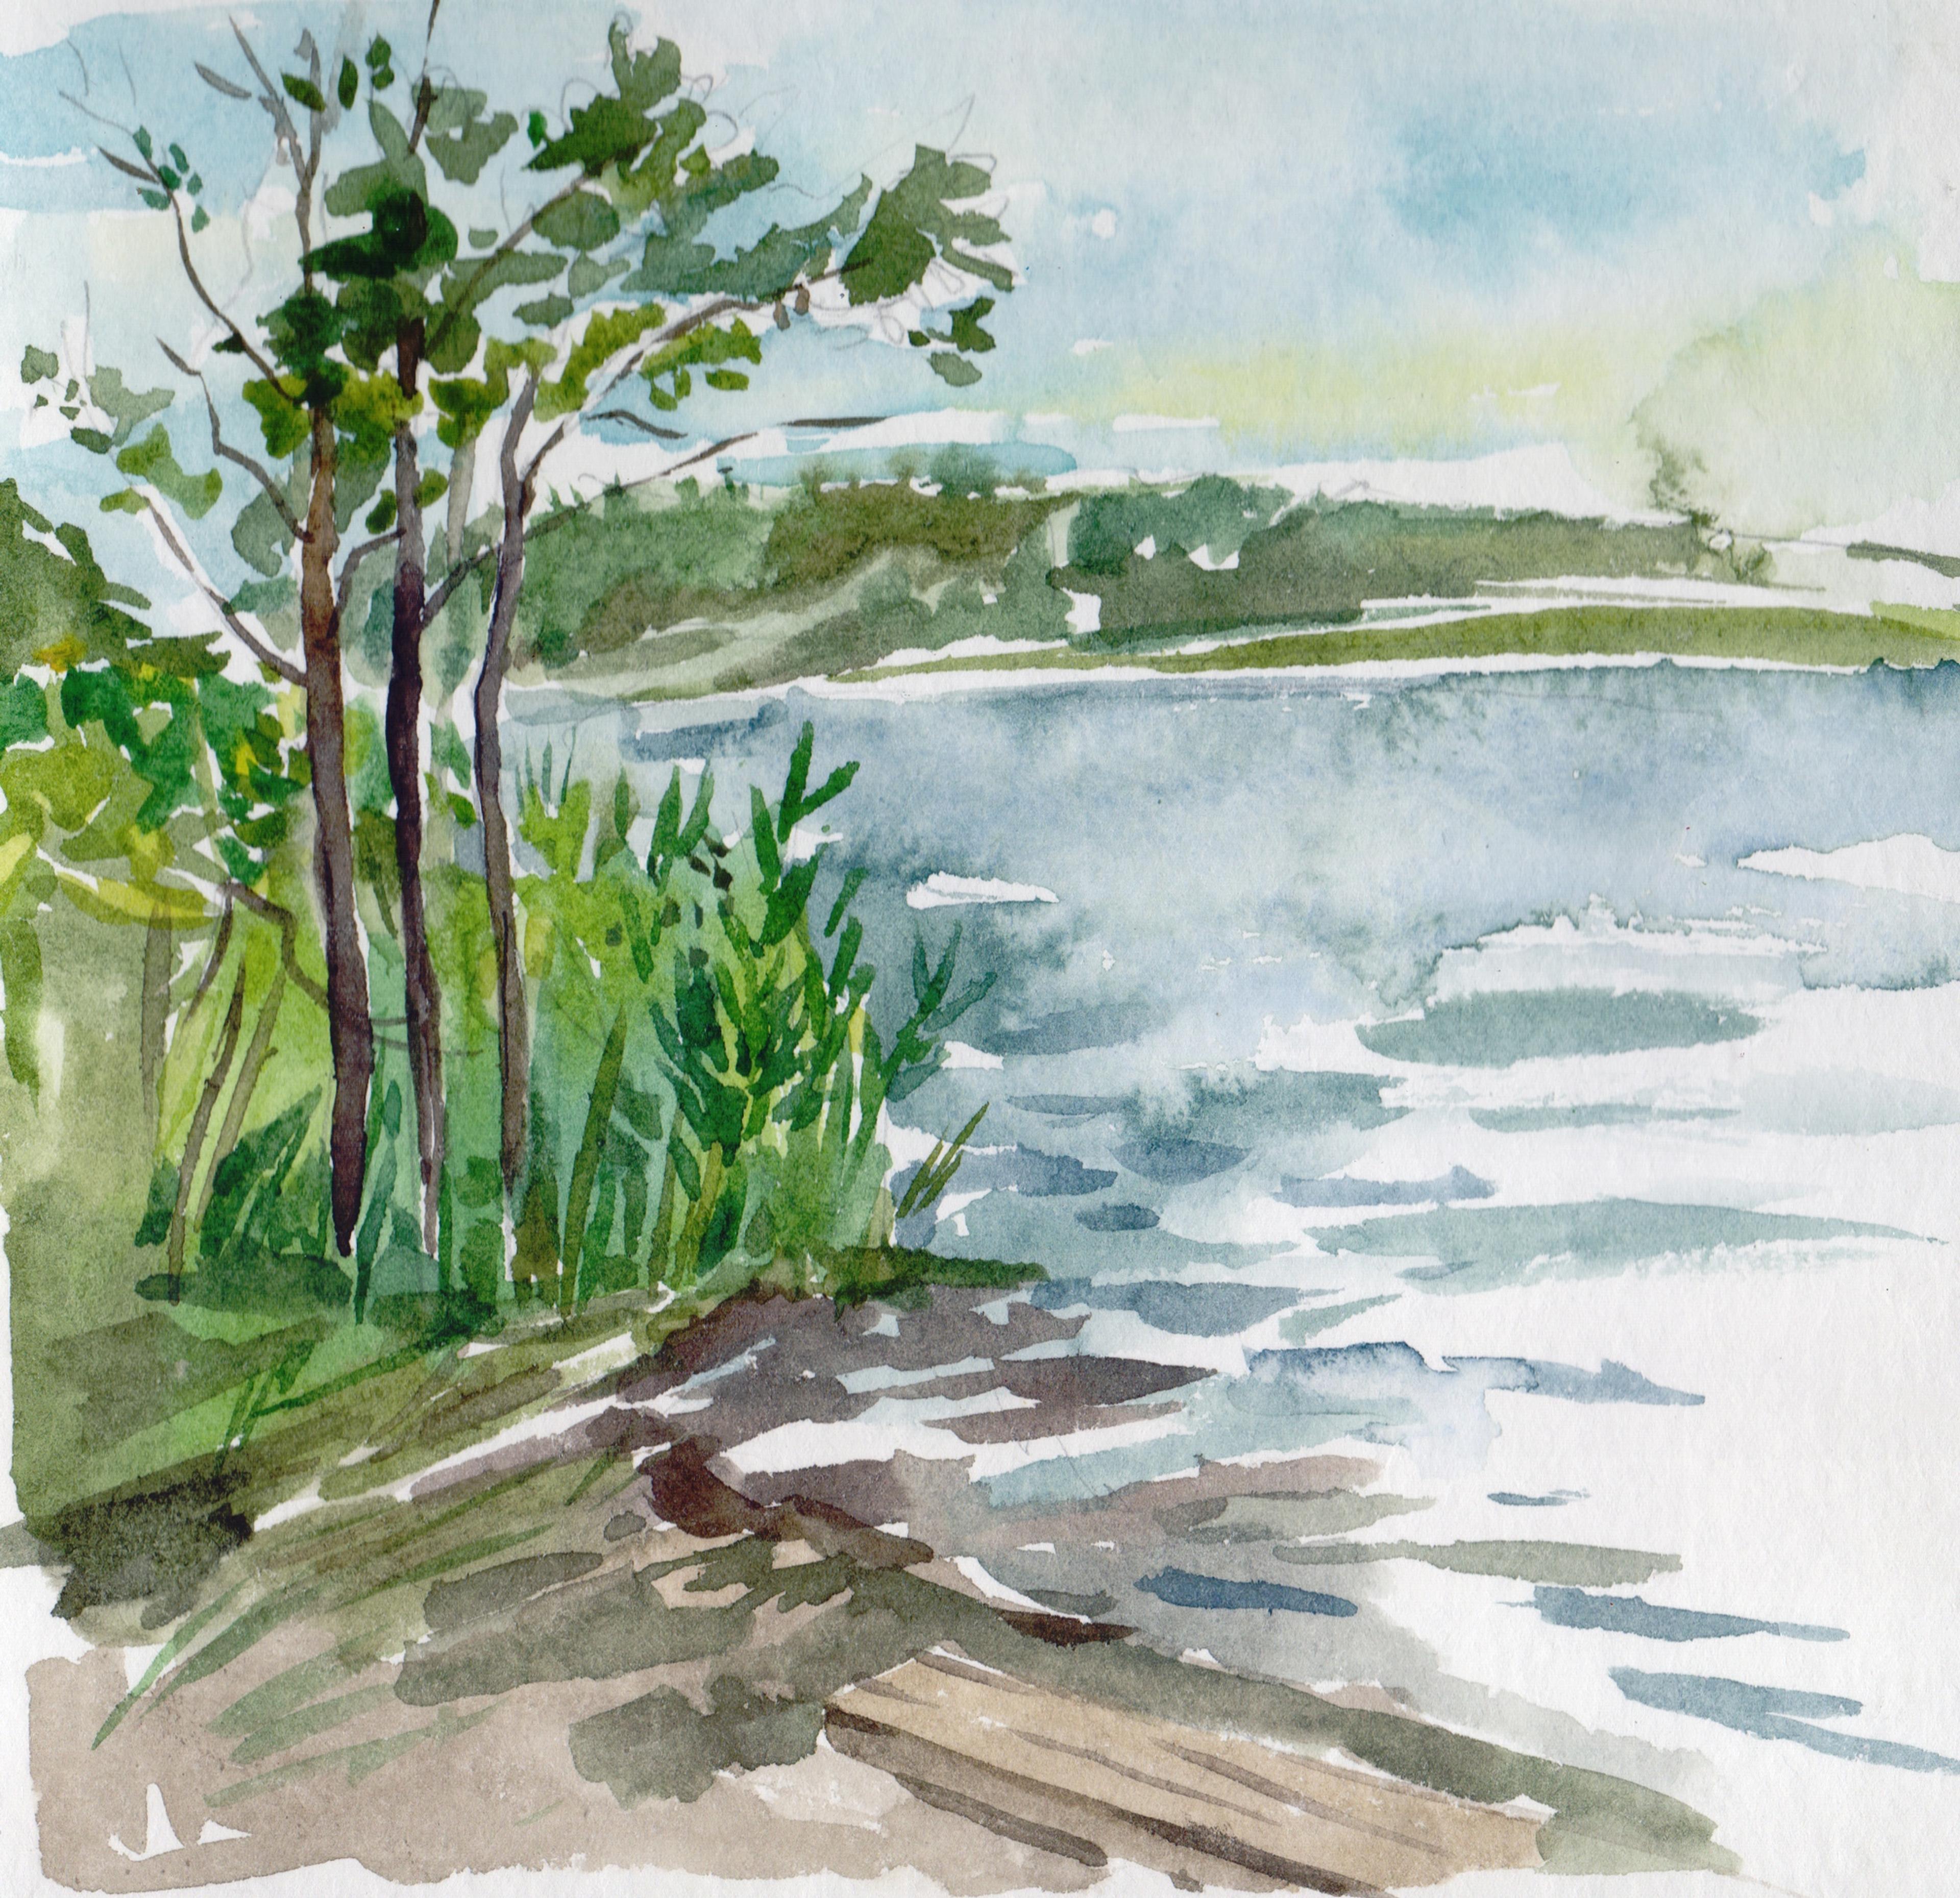 Watercolour painting of a lake and greenery